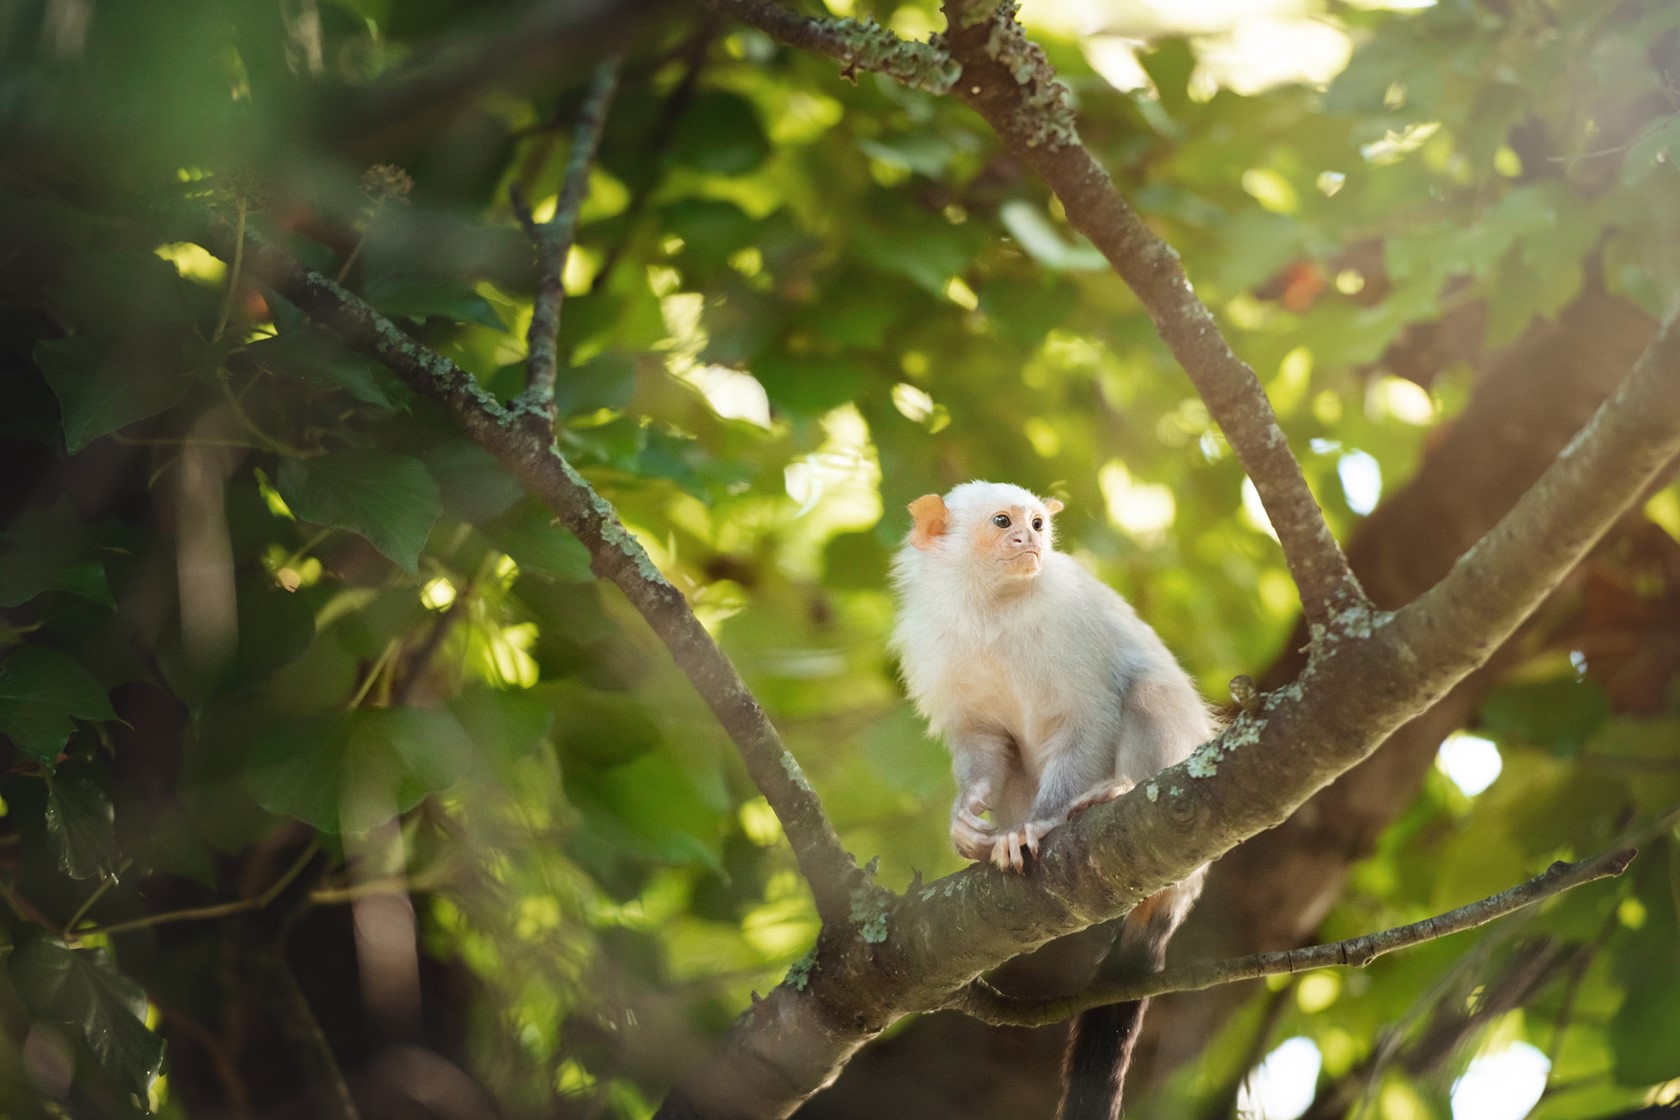 Silvery marmoset in a tree at Jersey Zoo